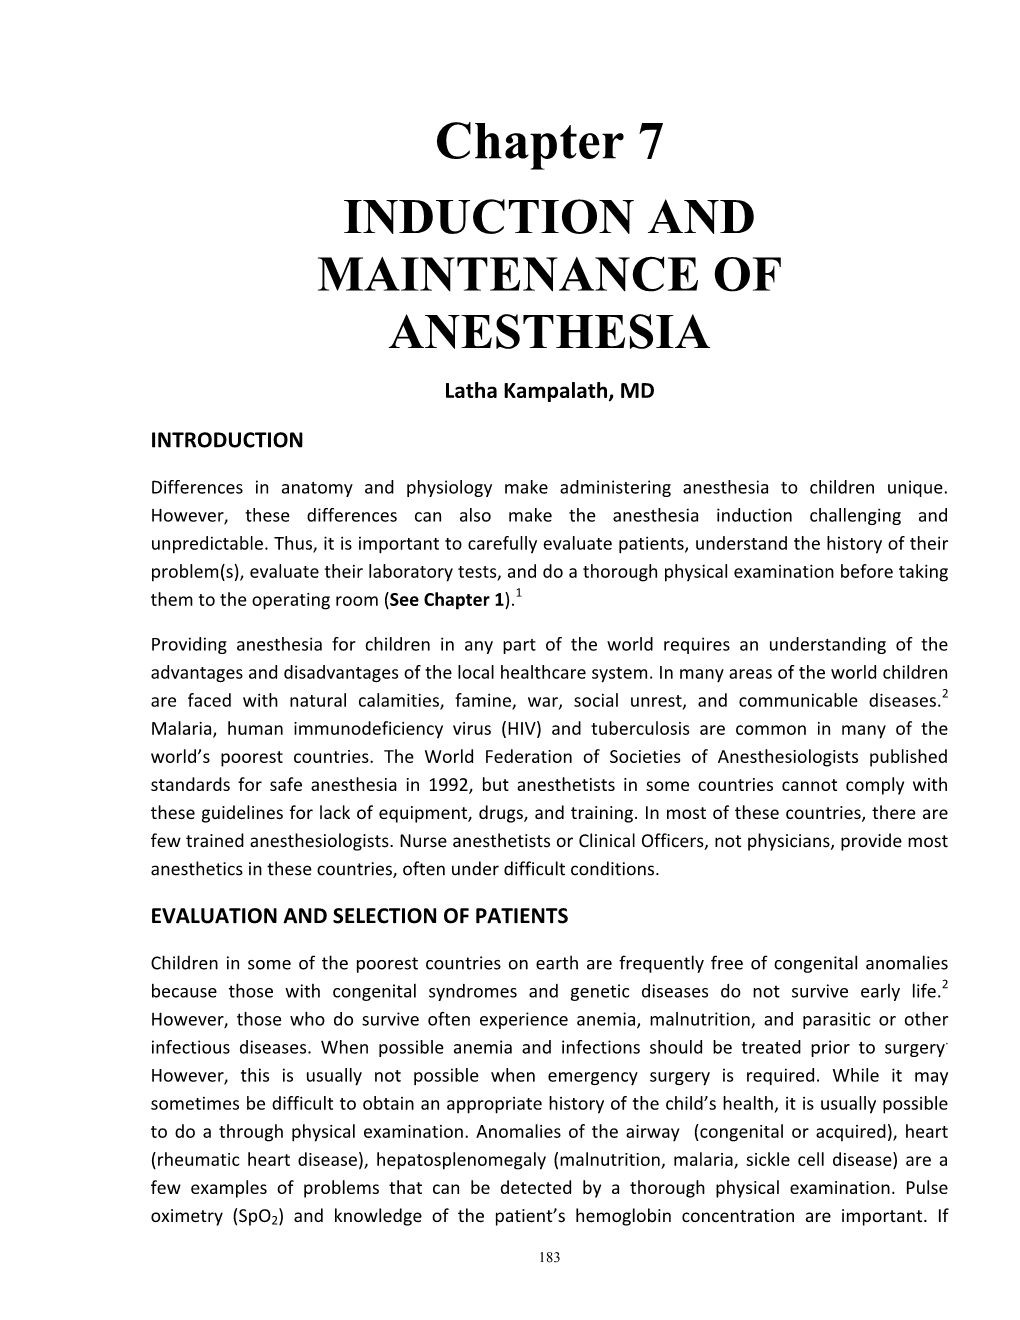 Anesthesia Care of Pediatric Patients in Developing Countries [Chapter 7]